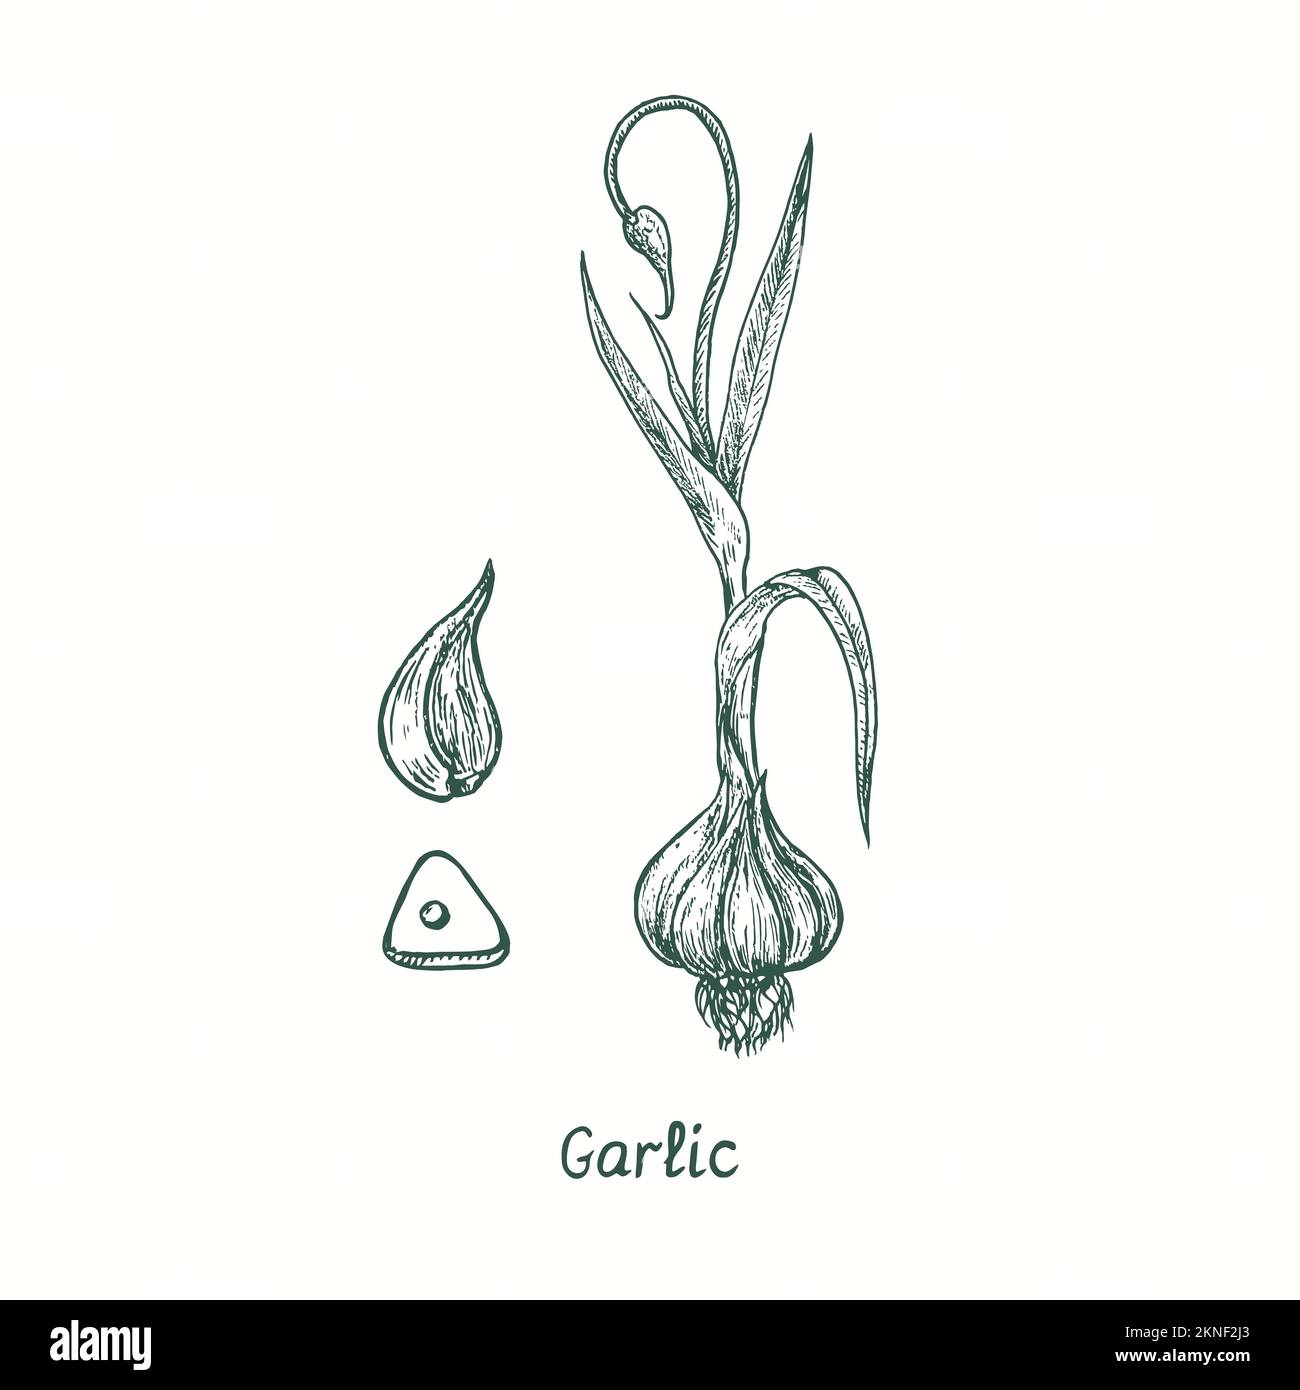 Garlic colection.  Ink black and white doodle drawing in woodcut style Stock Photo